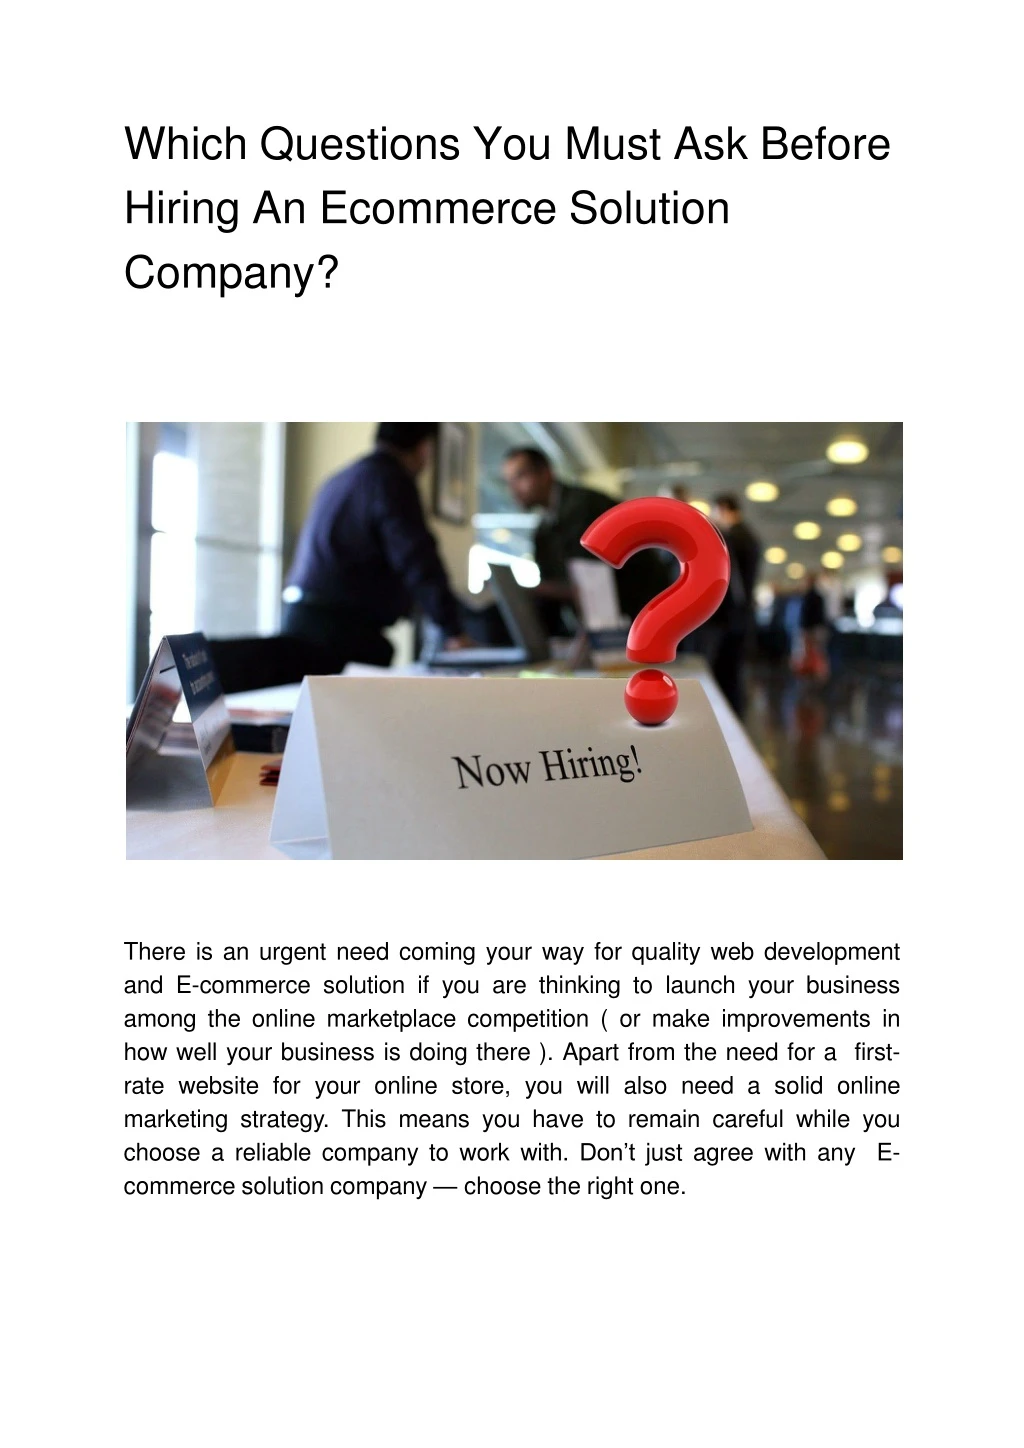 which questions you must ask before hiring an ecommerce solution company